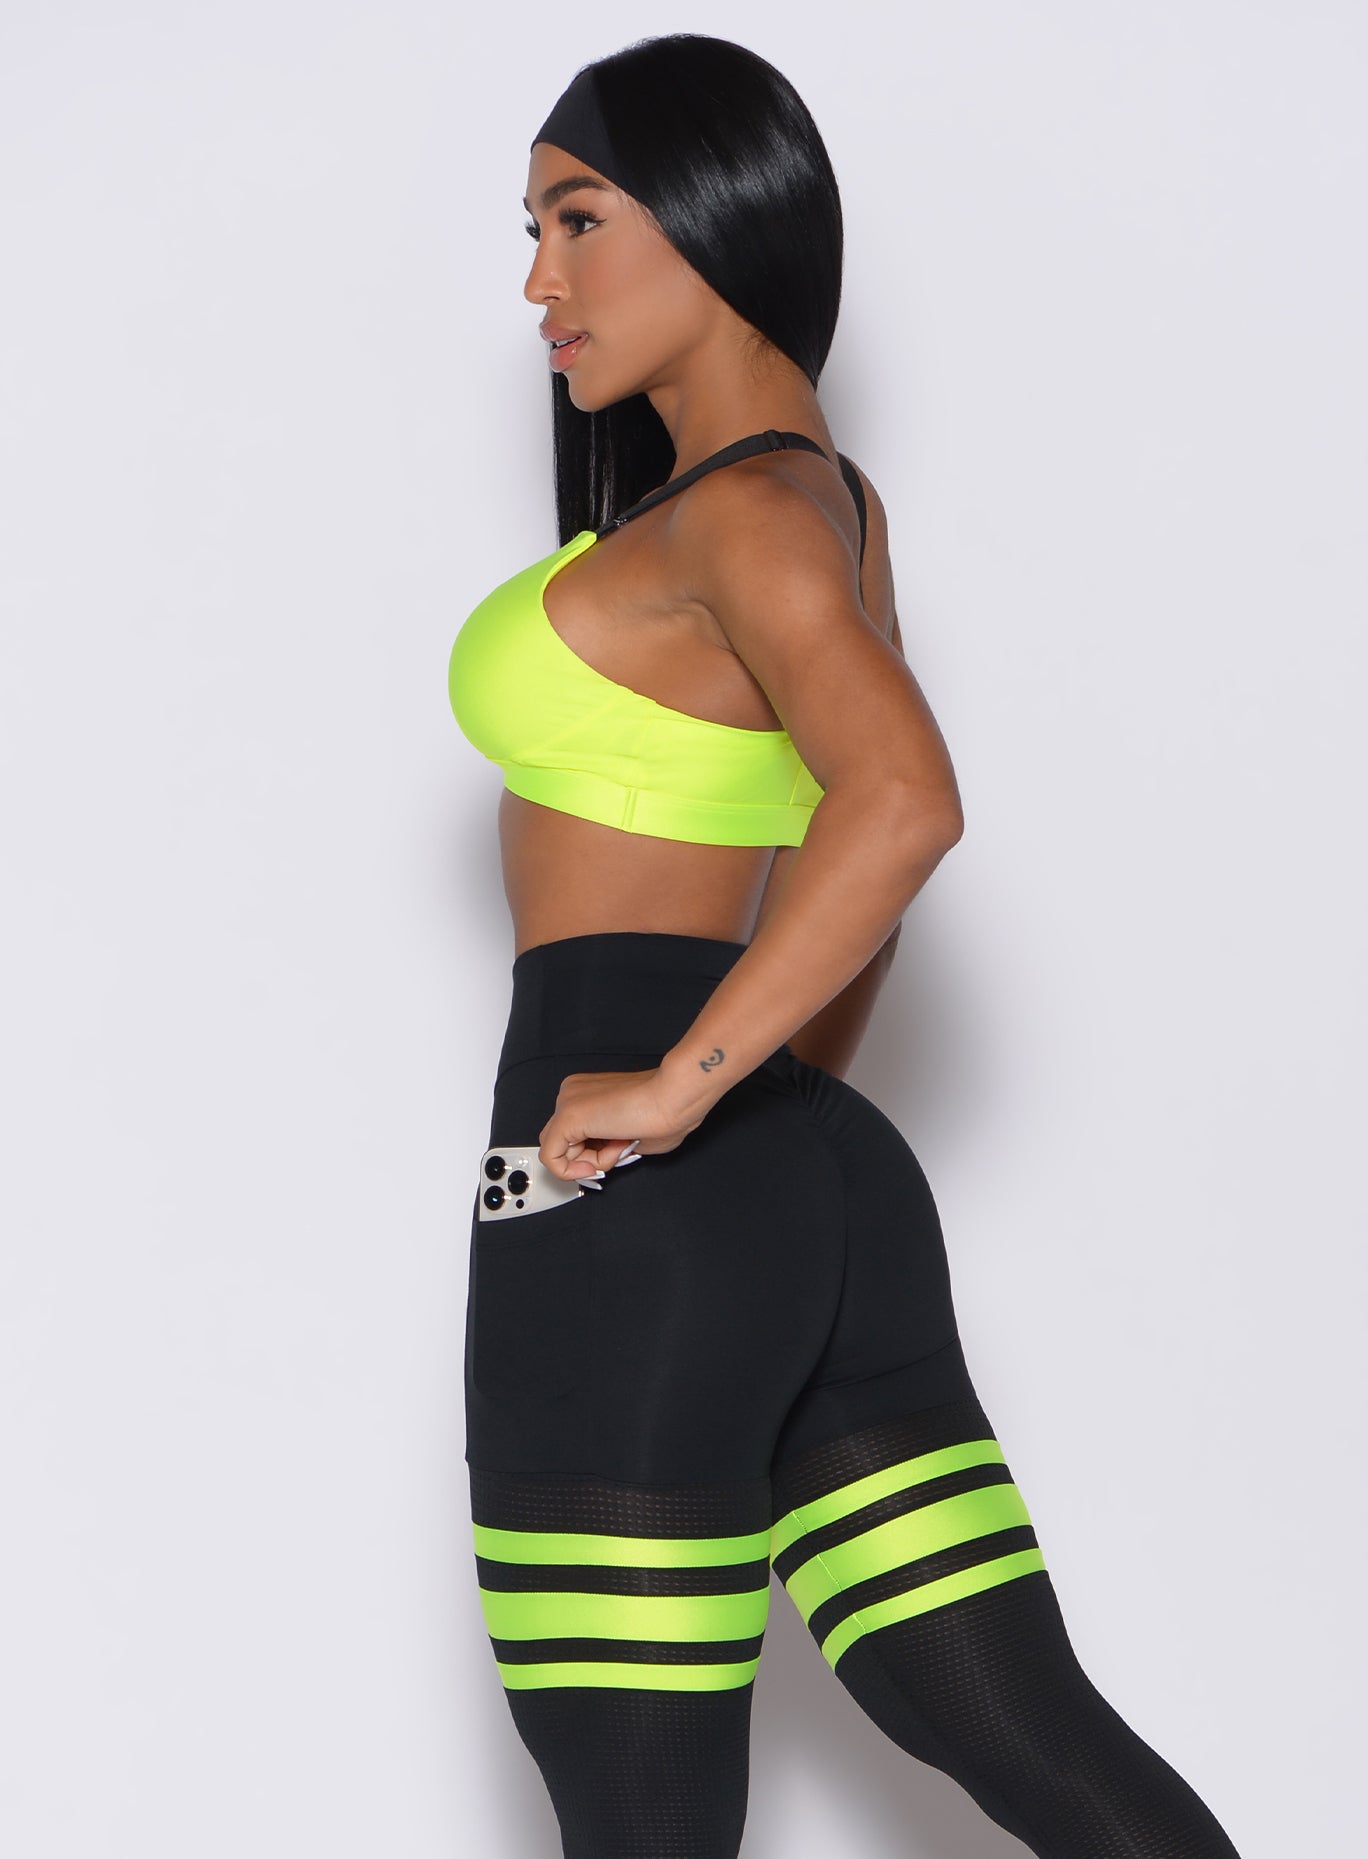 Left side profile view of a model in our glow sports bra in neon yellow and a matching leggings